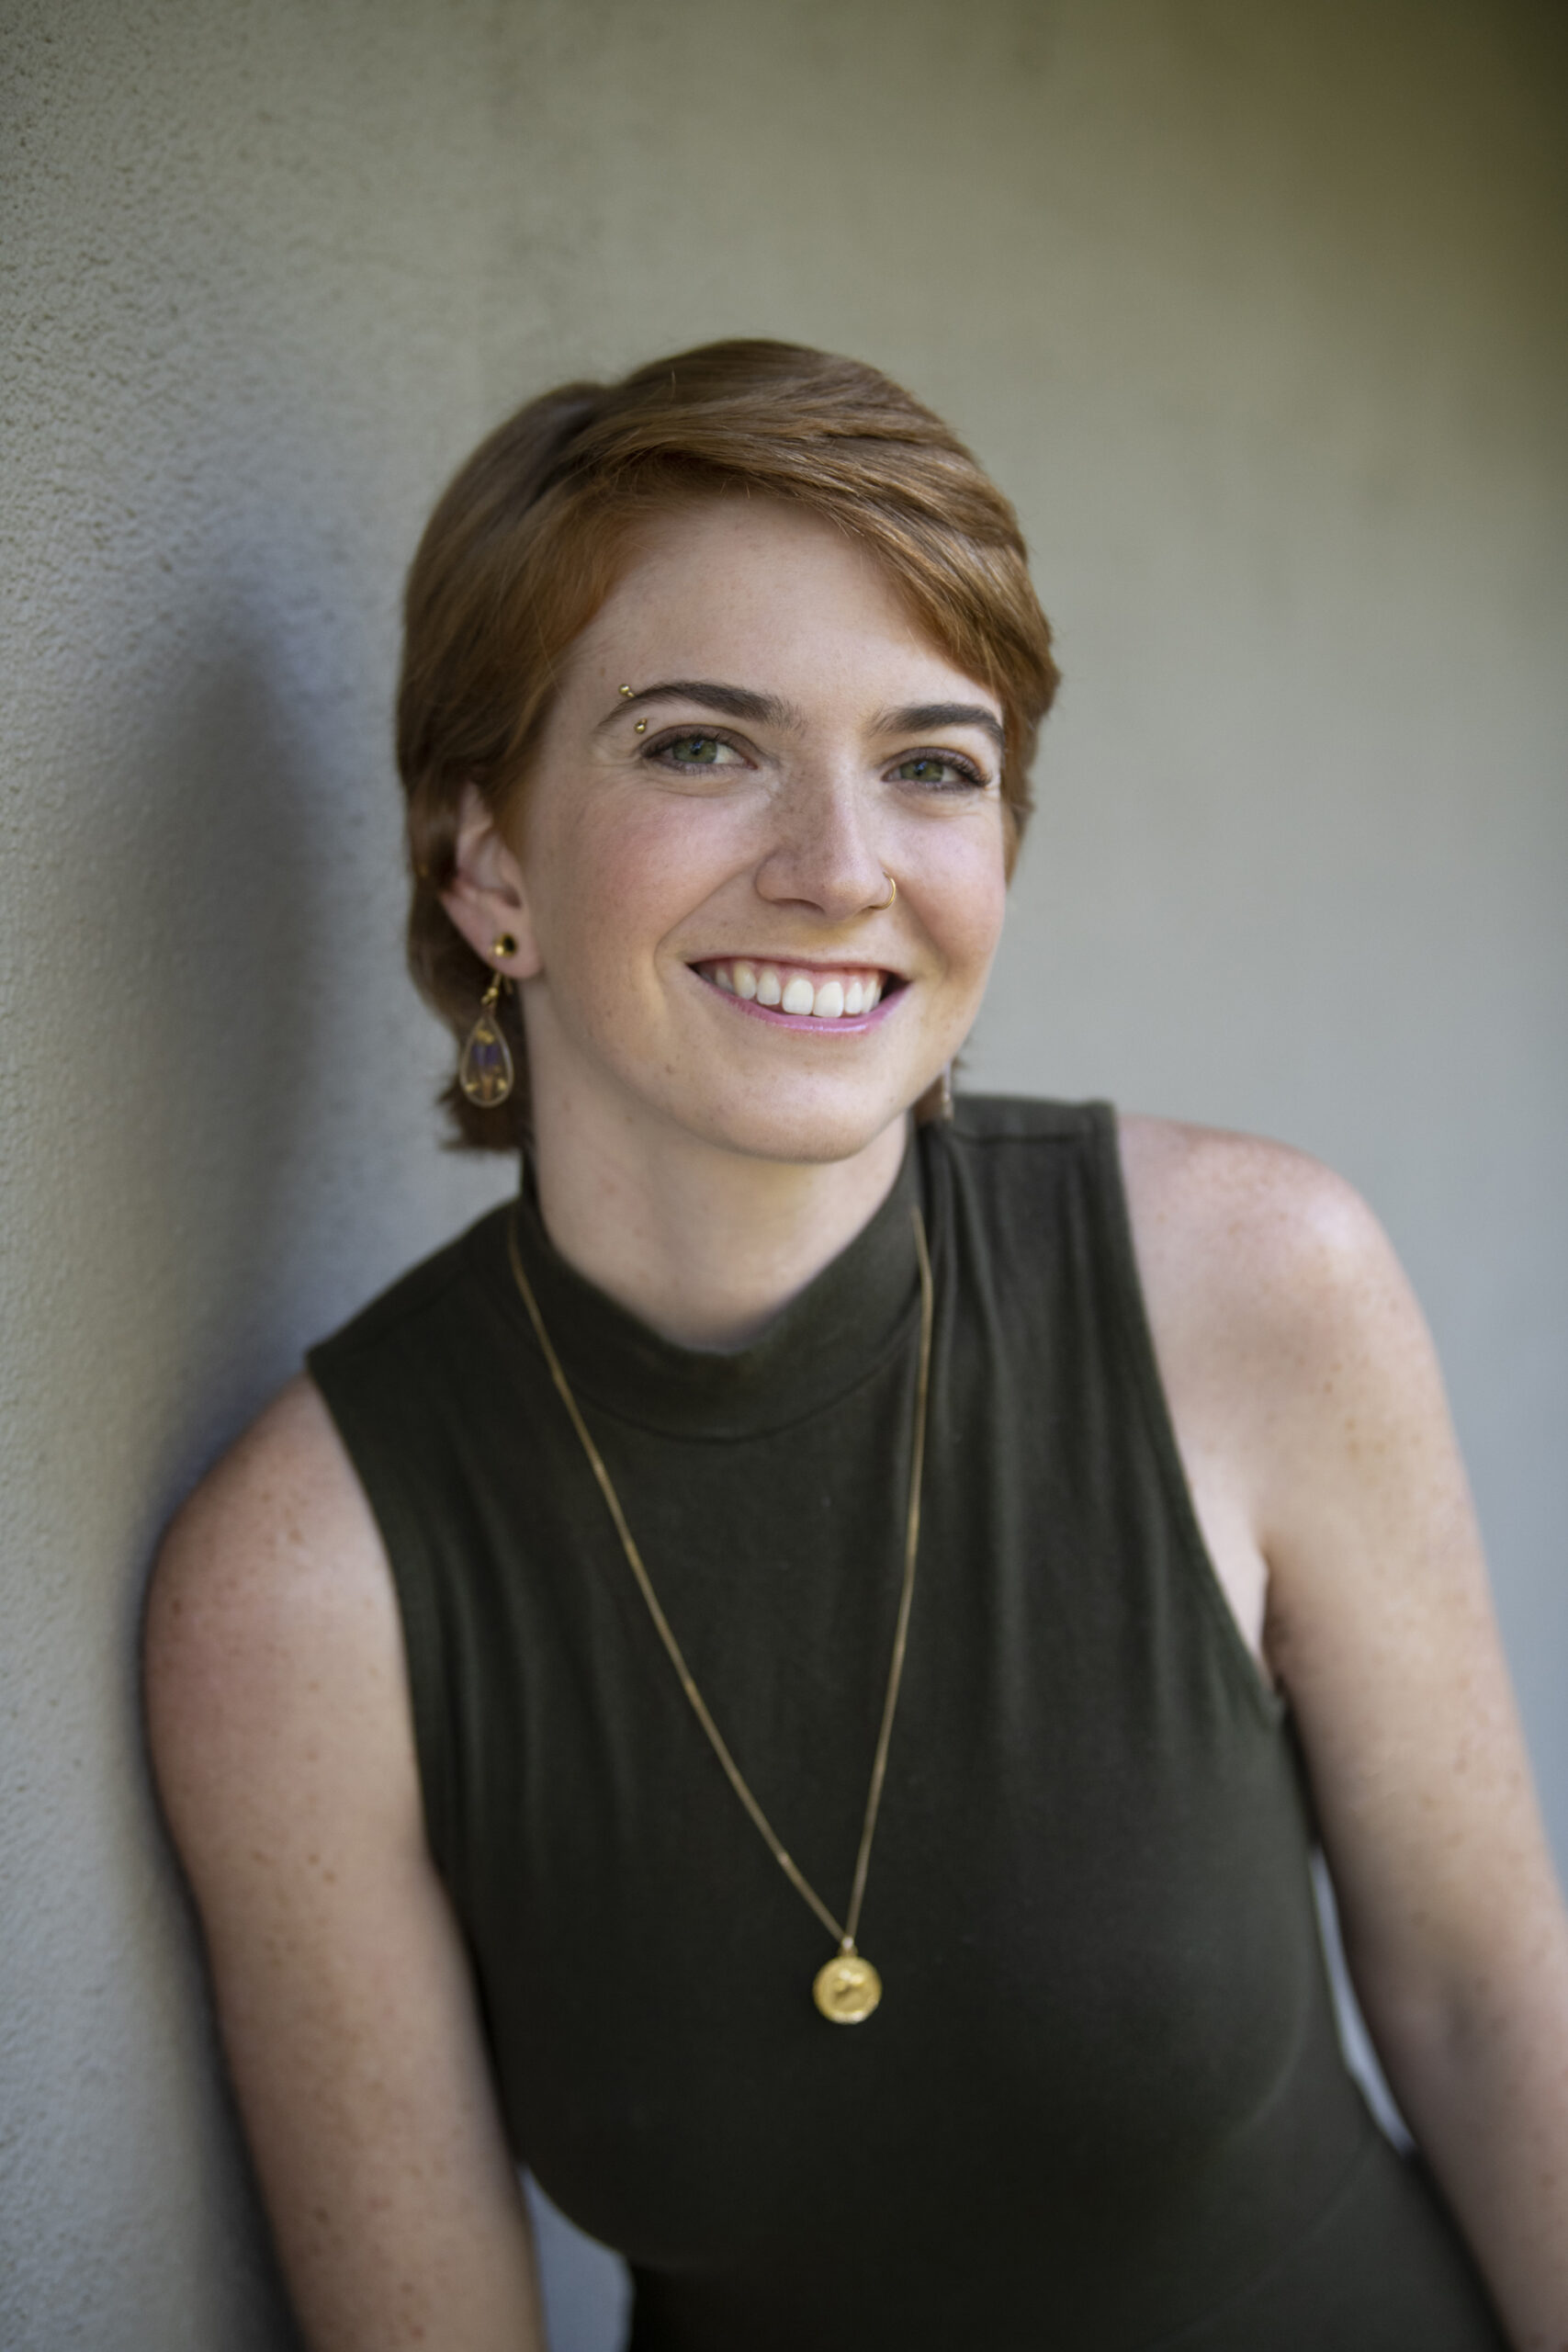 Partial-body headshot of Rachel leaning against a grey wall in a no-sleeve olive green dress.